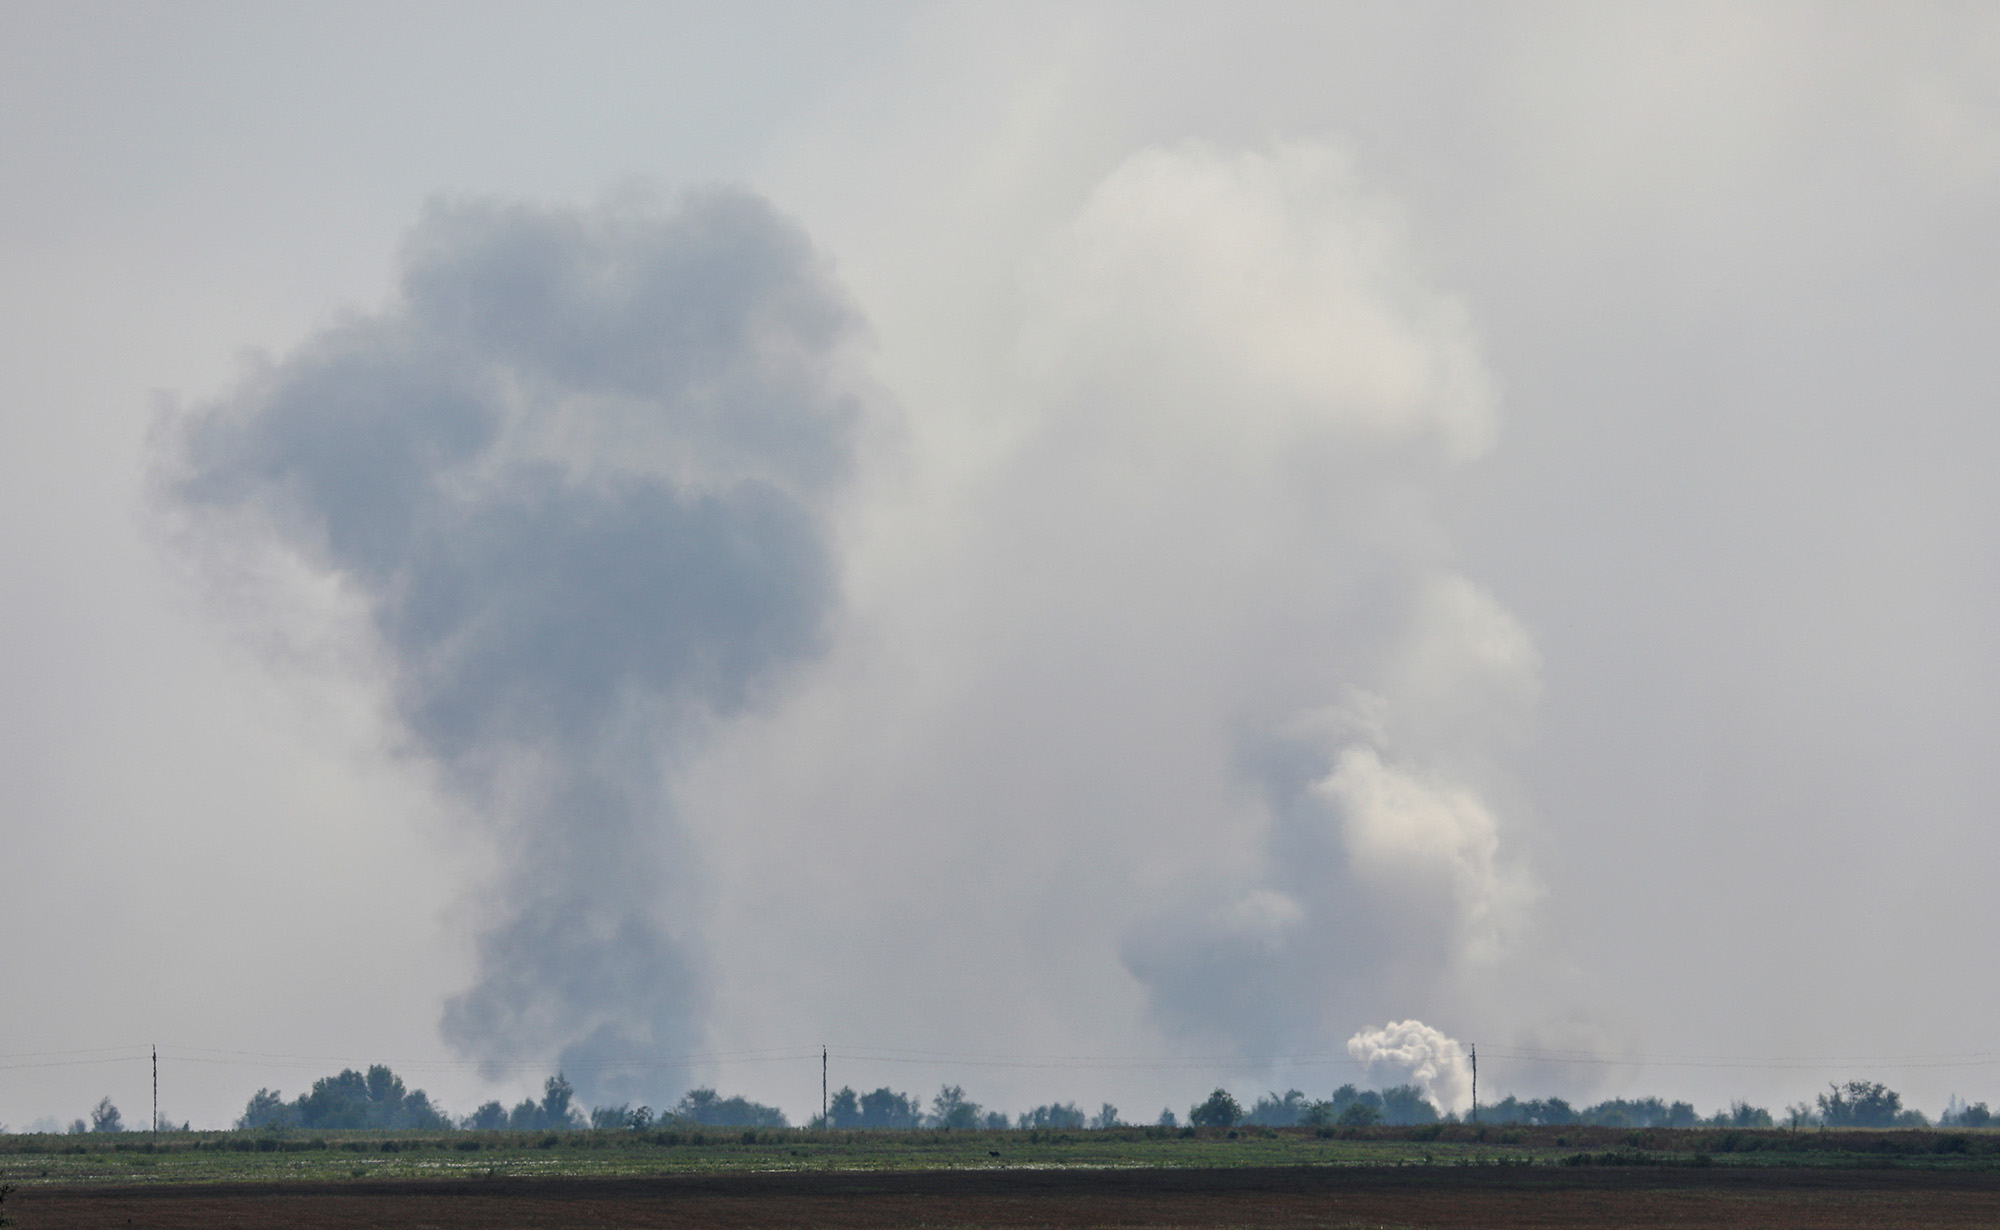 Smoke rises above the area following an alleged explosion in the village of Maiskoye in the Dzhankoi district, Crimea on August 16.